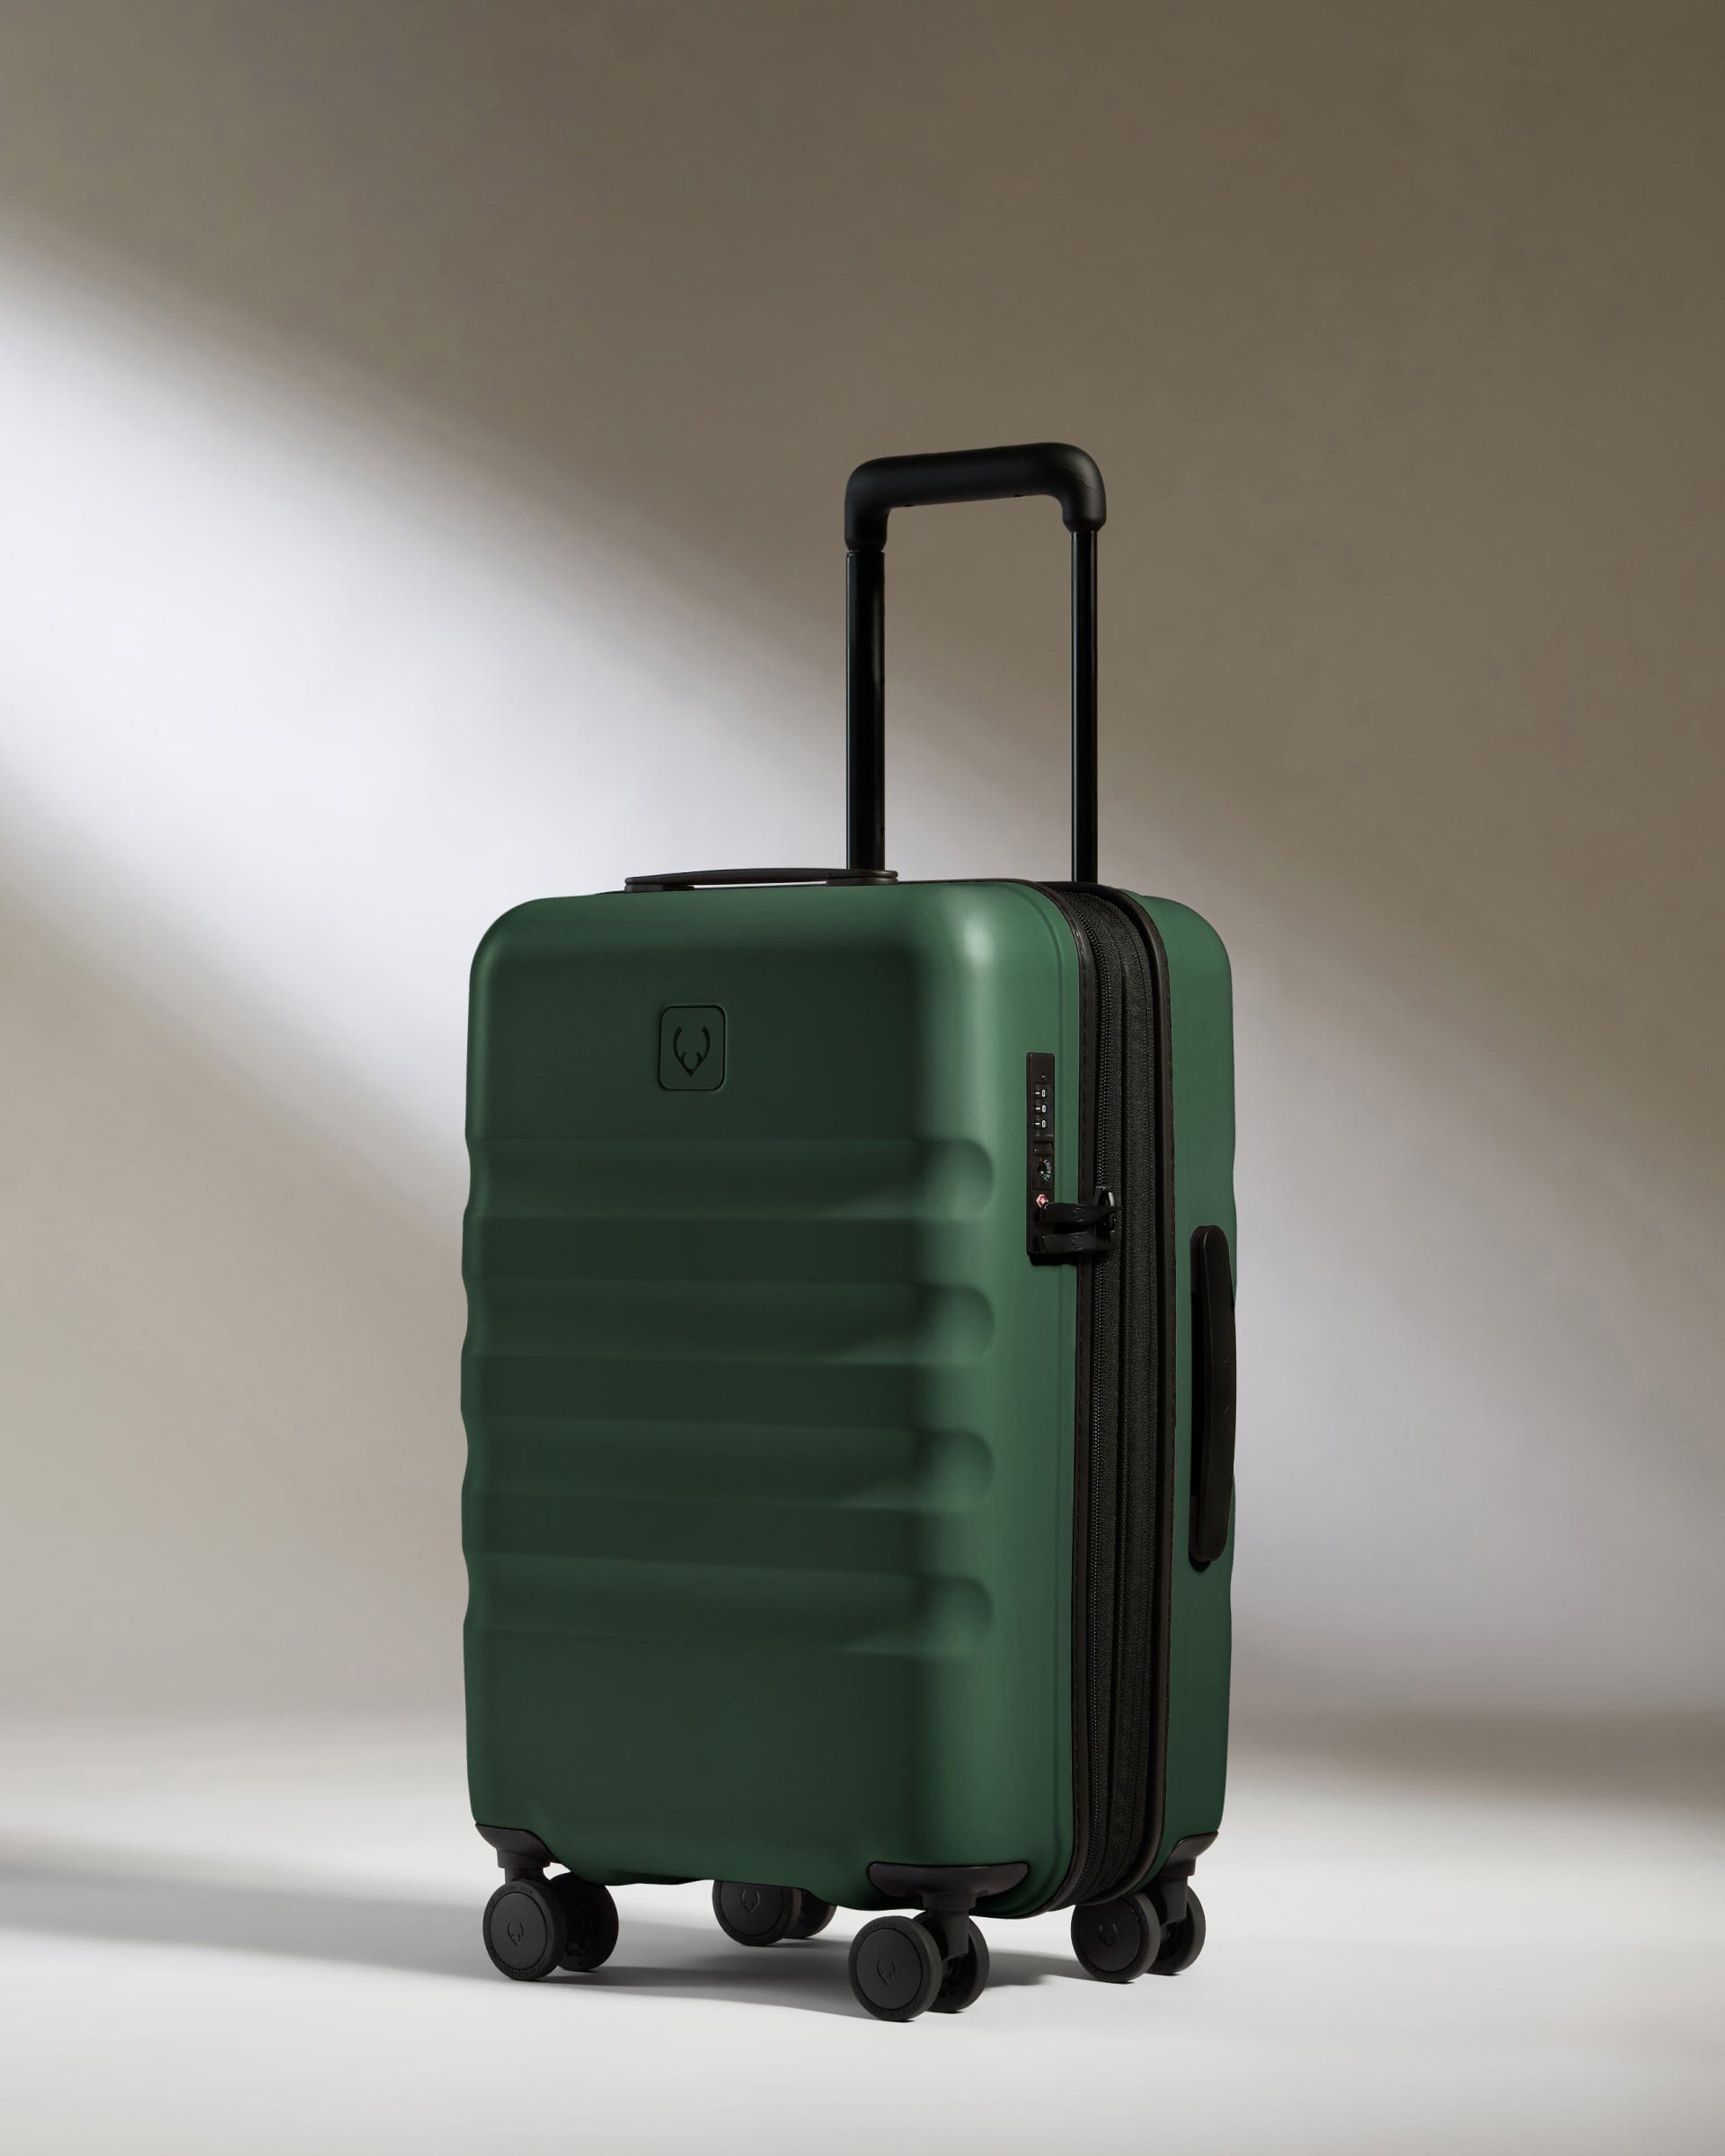 View Icon Stripe Cabin Suitcase With Expander In Antler Green Size 23cm x 55cm x 36cm information